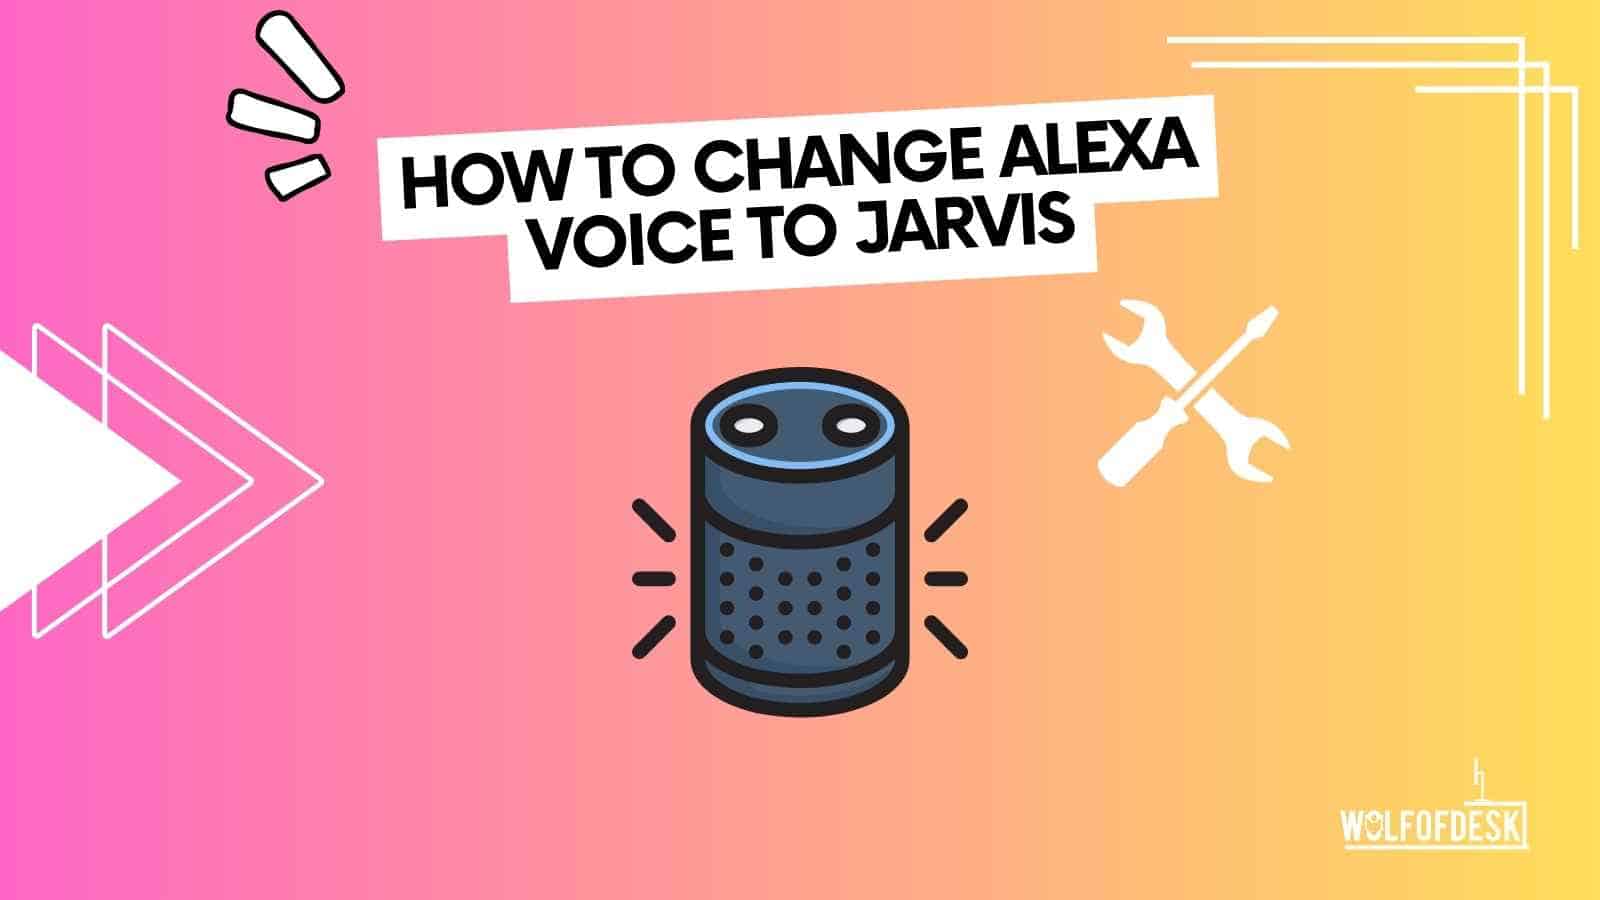 guide how you can change alexa voice to Jarvis from Iron Man(Avengers)